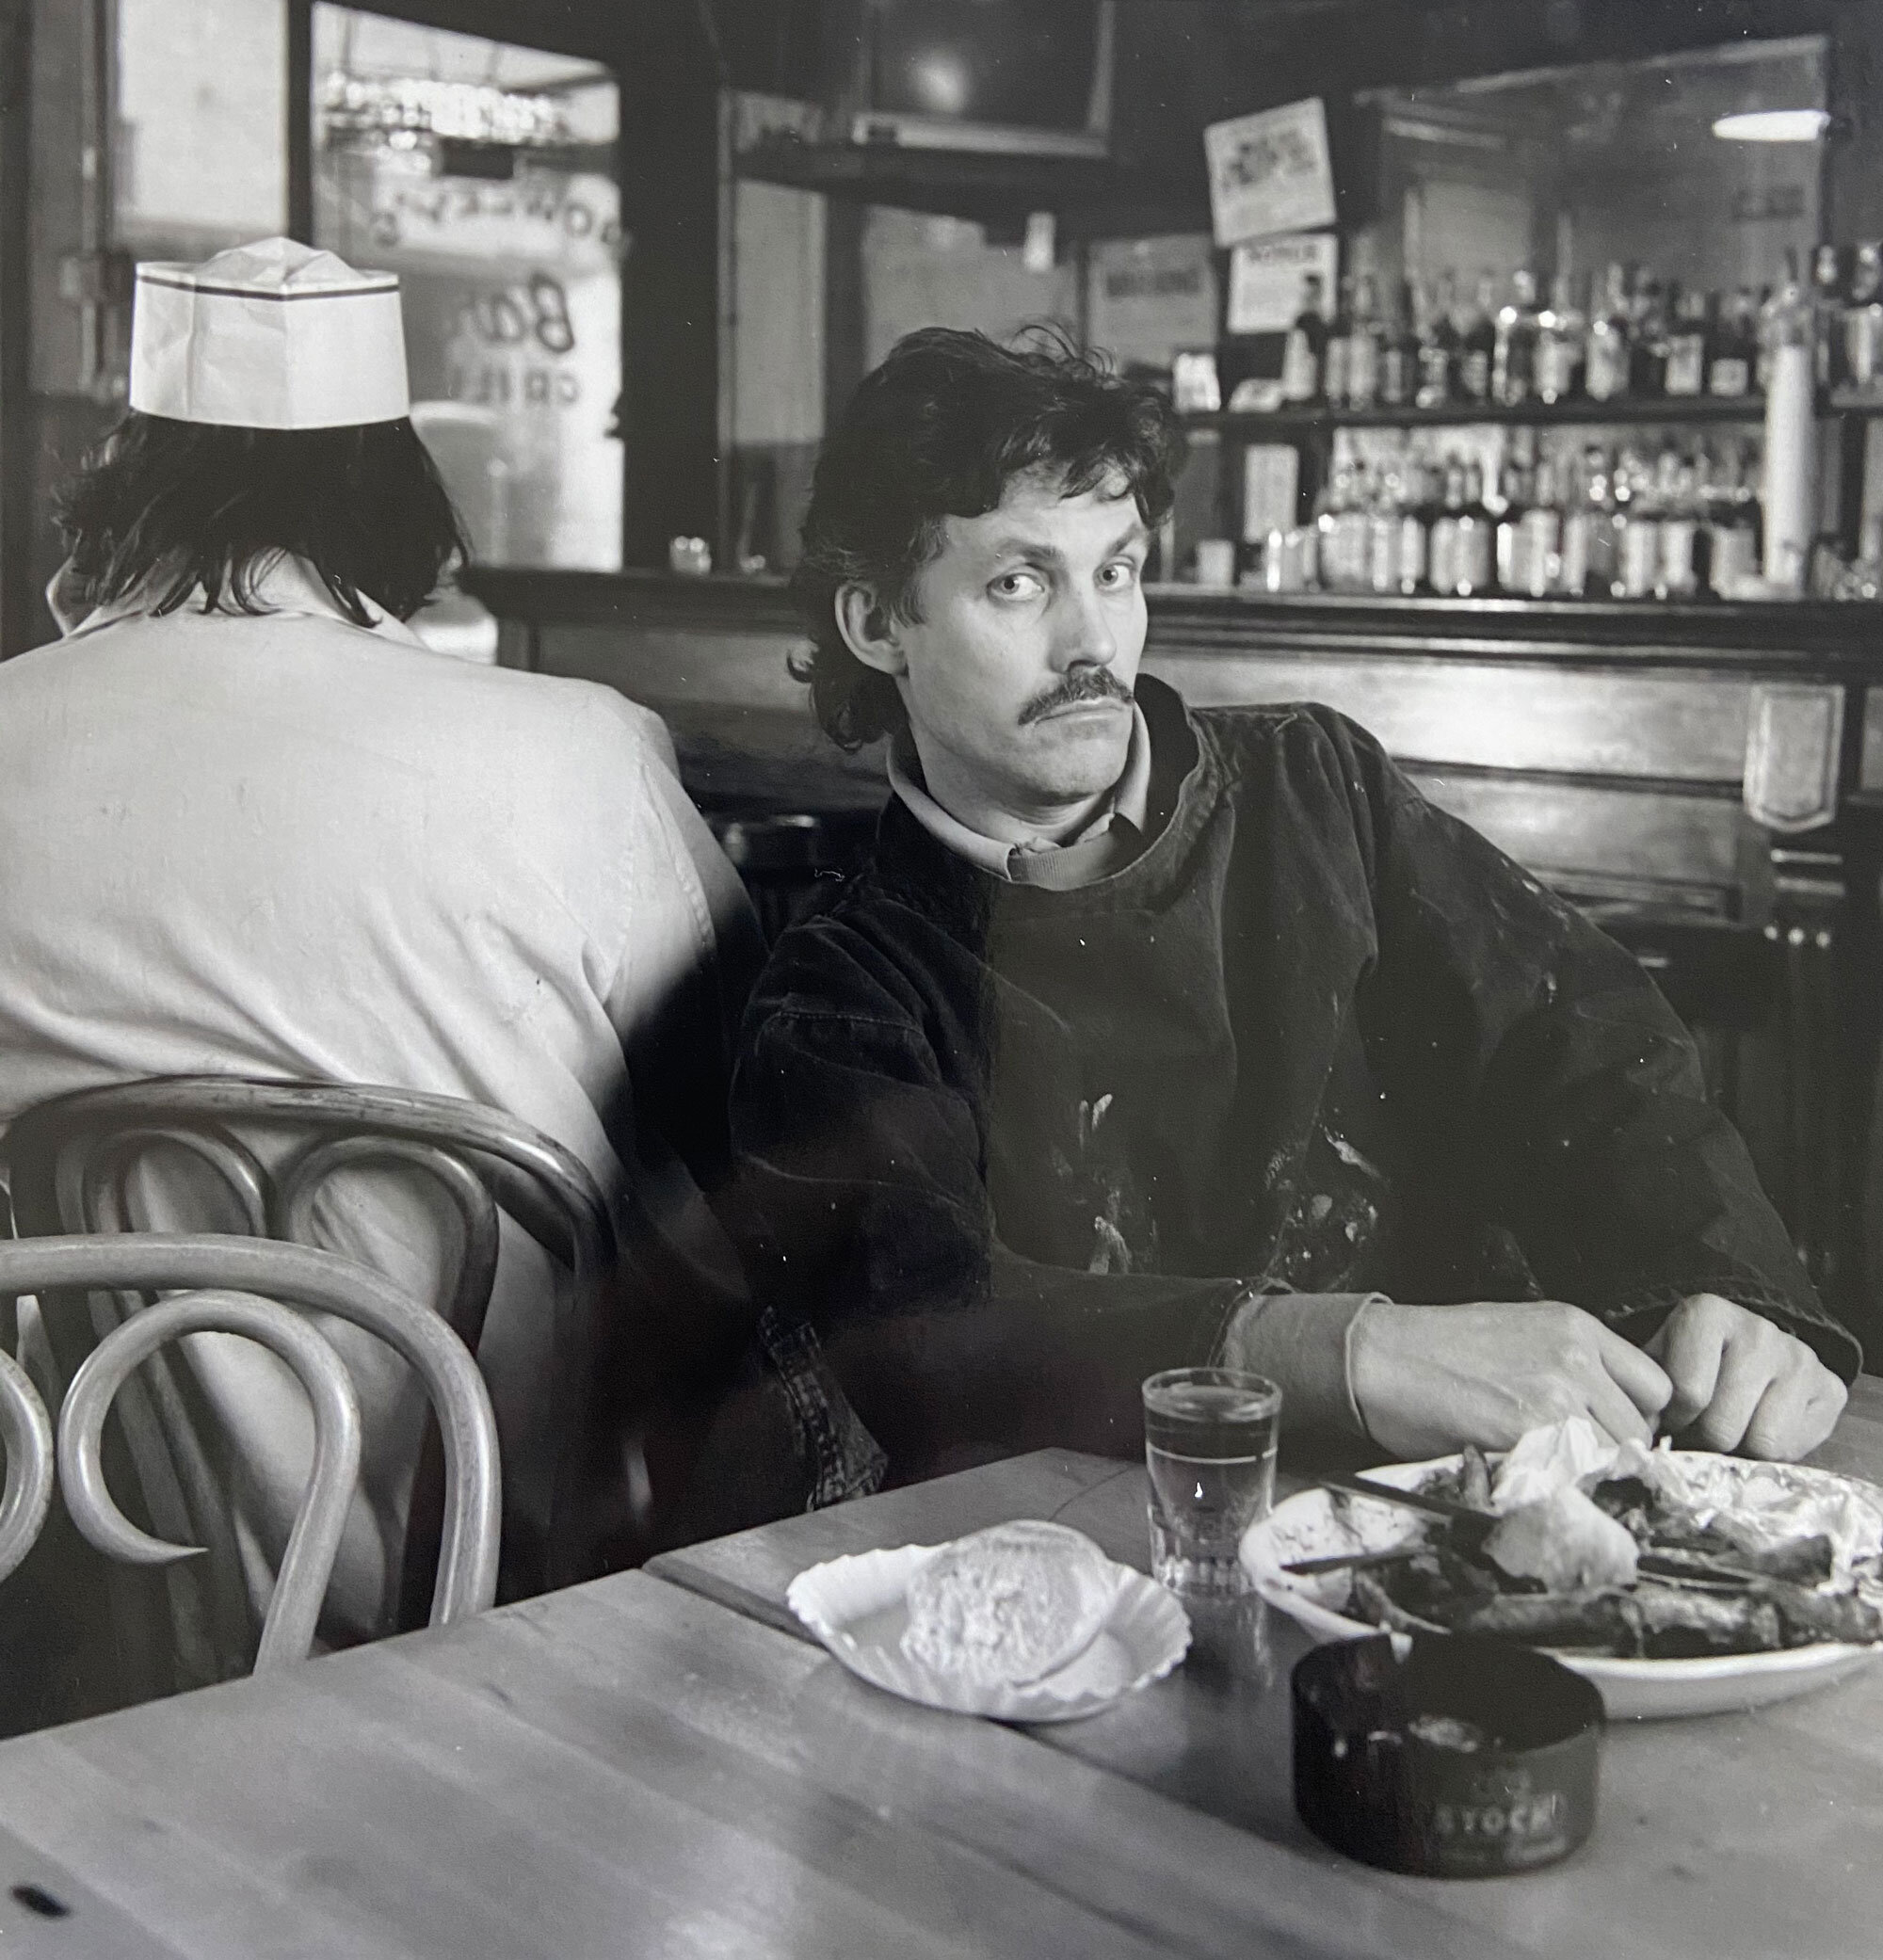  At Howley’s Bar West 14th Street, NYC, 1986 